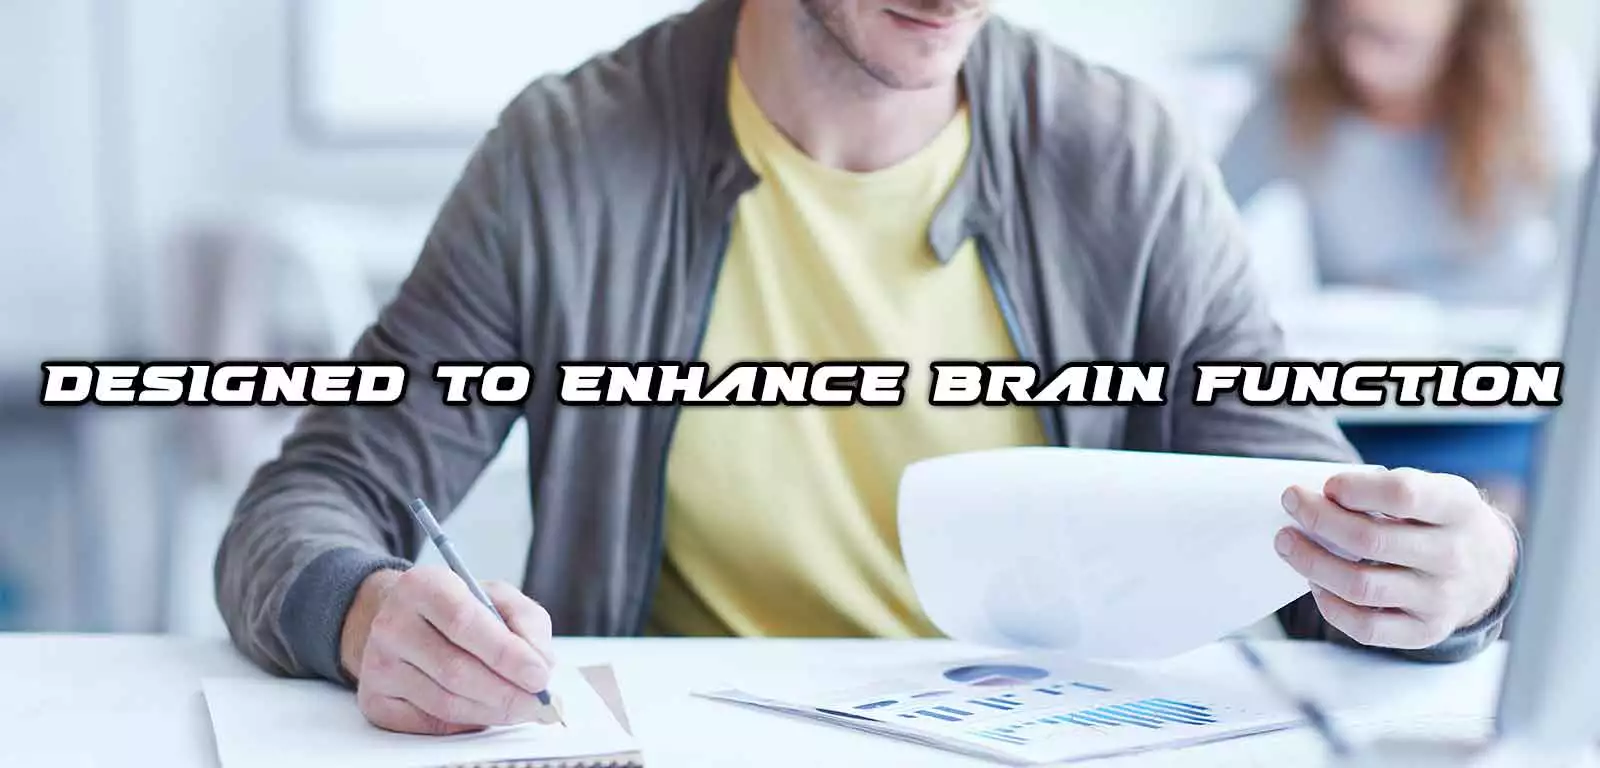 This supplement increases alertness and enhances memory